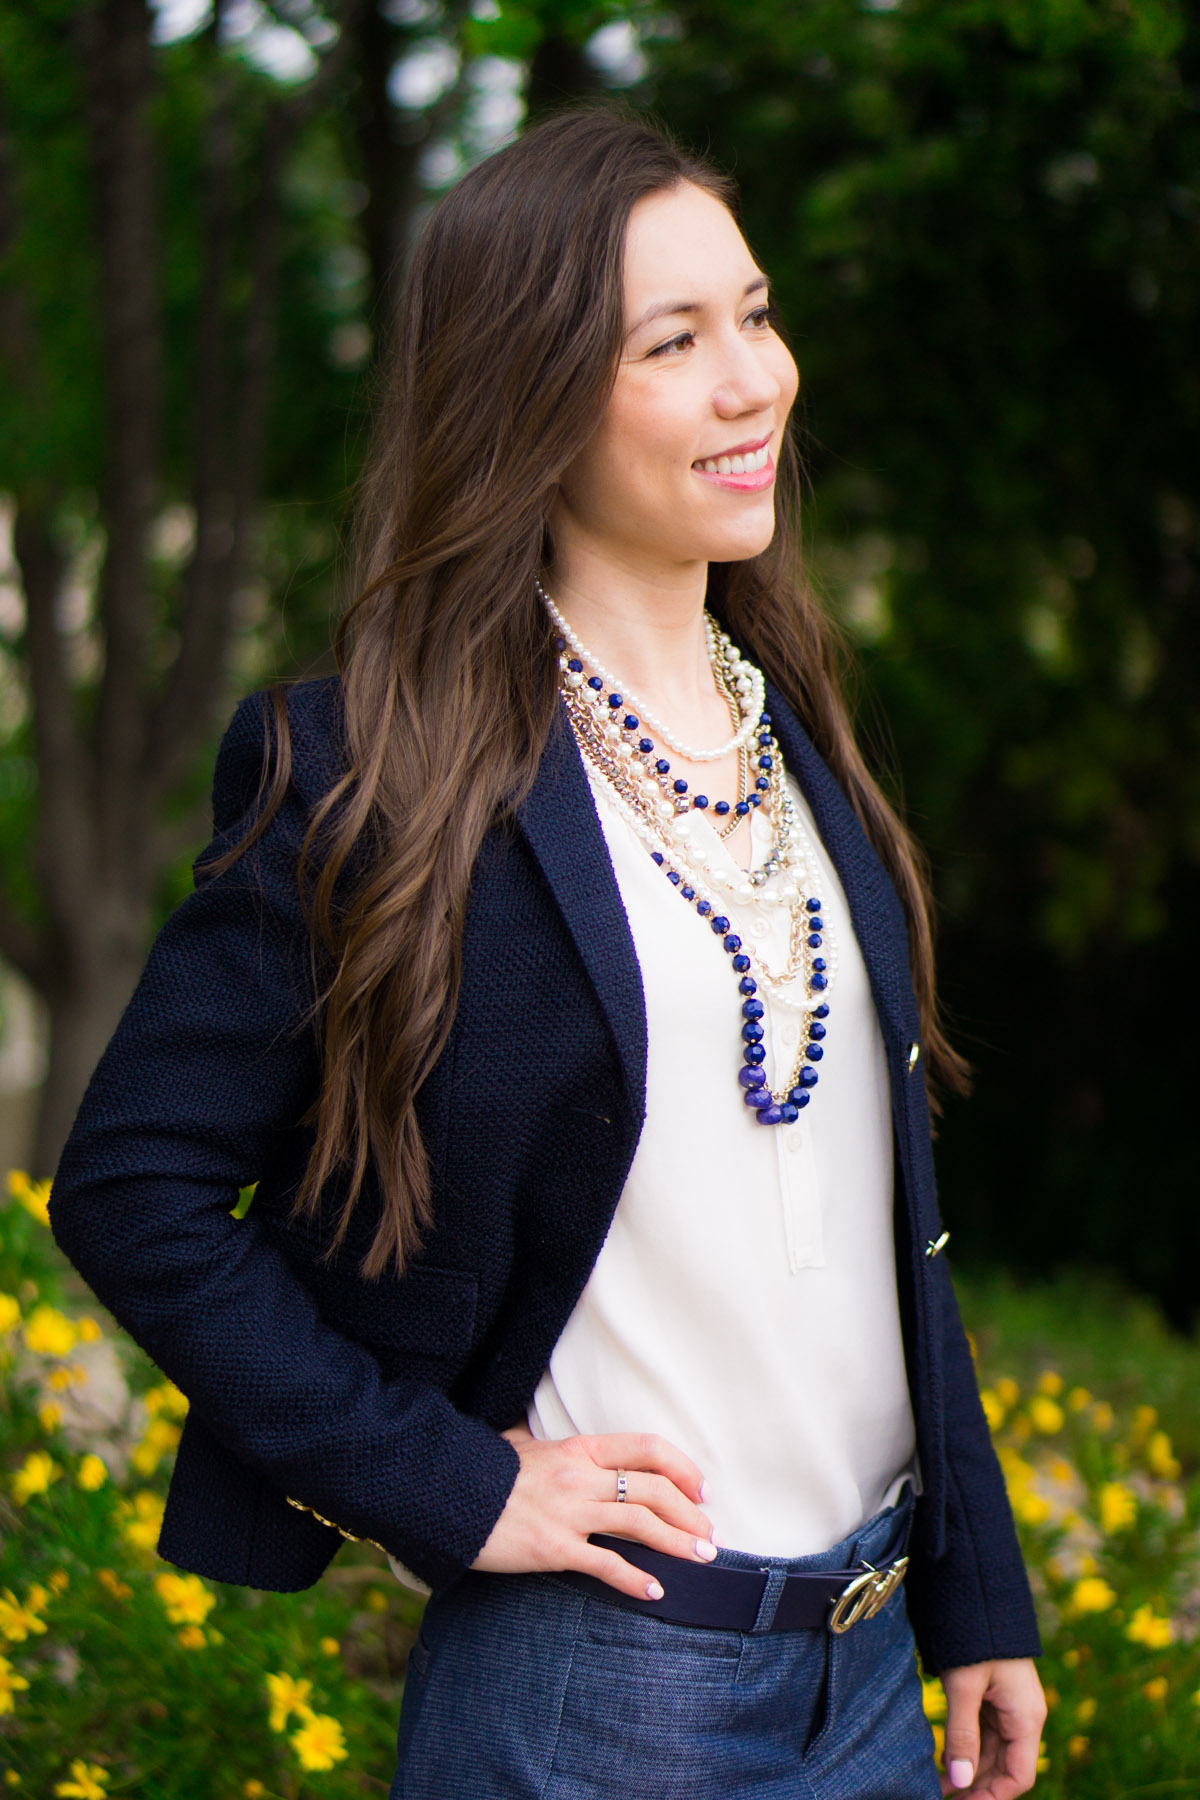 Ann Taylor Pearlized necklace & blazer | Banana Republic Sloan Slim ankle pants | Blue work outfit ideas inspiration | spring corporate attire ideas | Talbots belt | Cole Haan bow heels